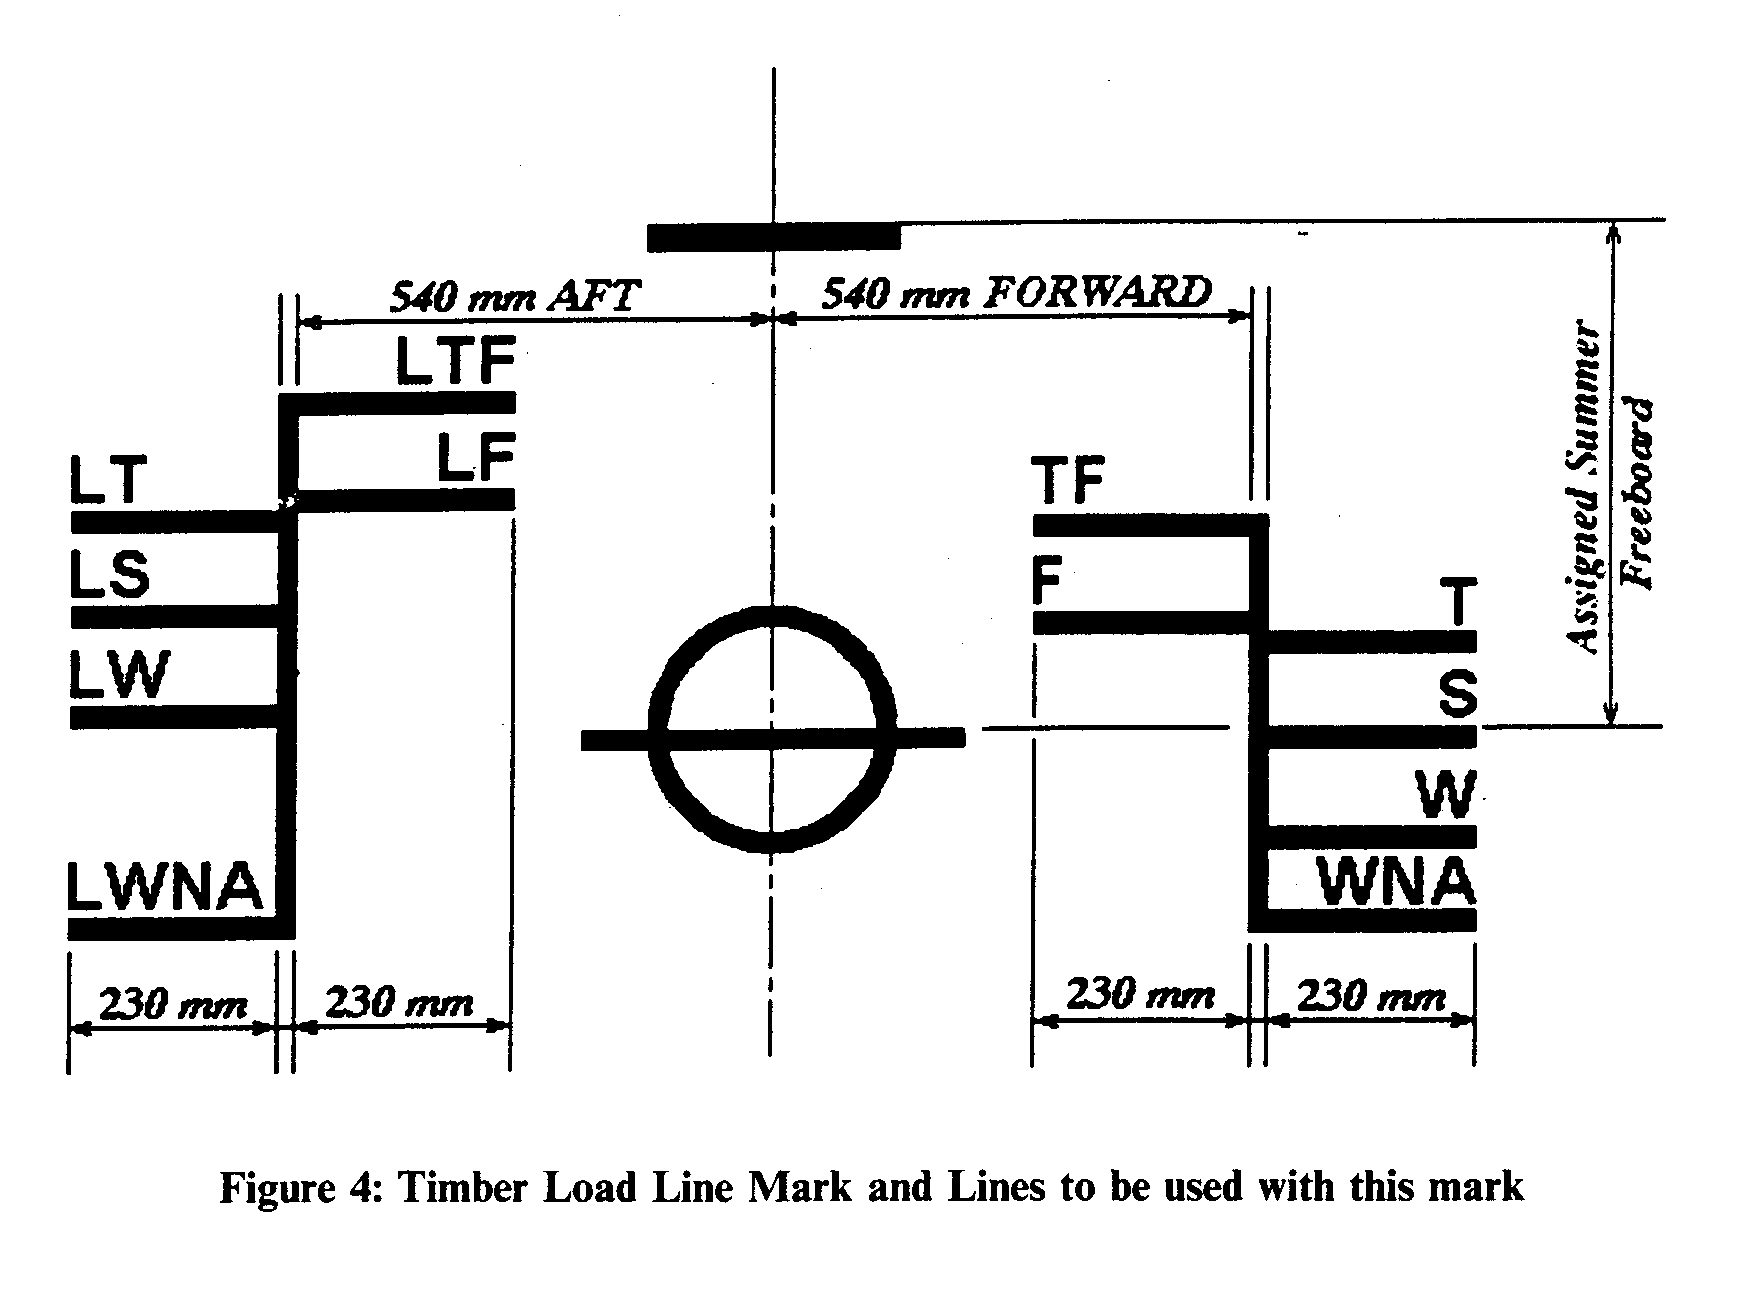 Figure 4 - Timber Load Line Mark and Lines to be used with this mark